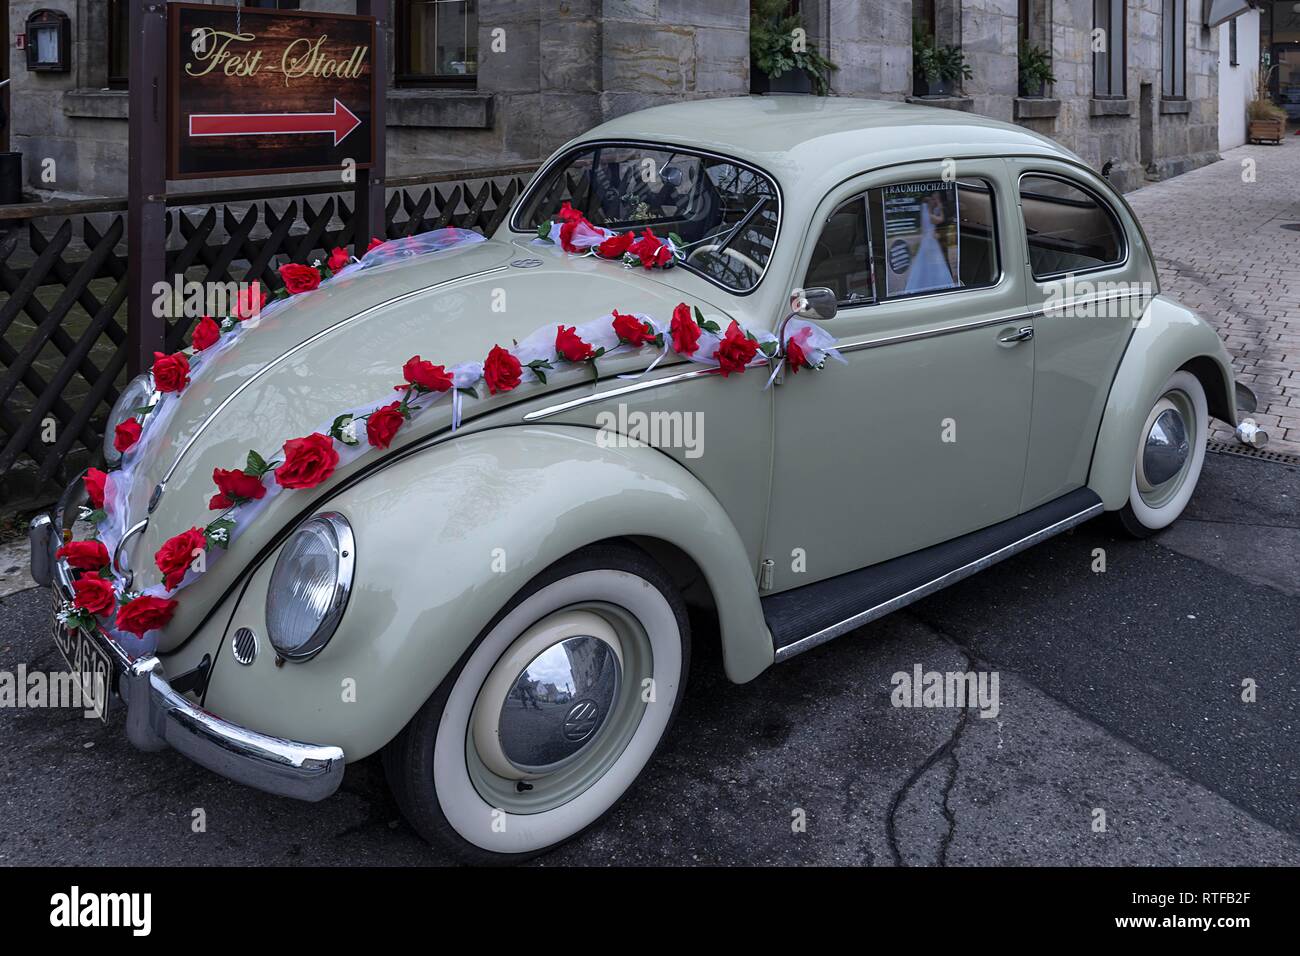 Oldtimer, VW Beetle from 1955 as wedding car decorated with roses, Bavaria, Germany Stock Photo